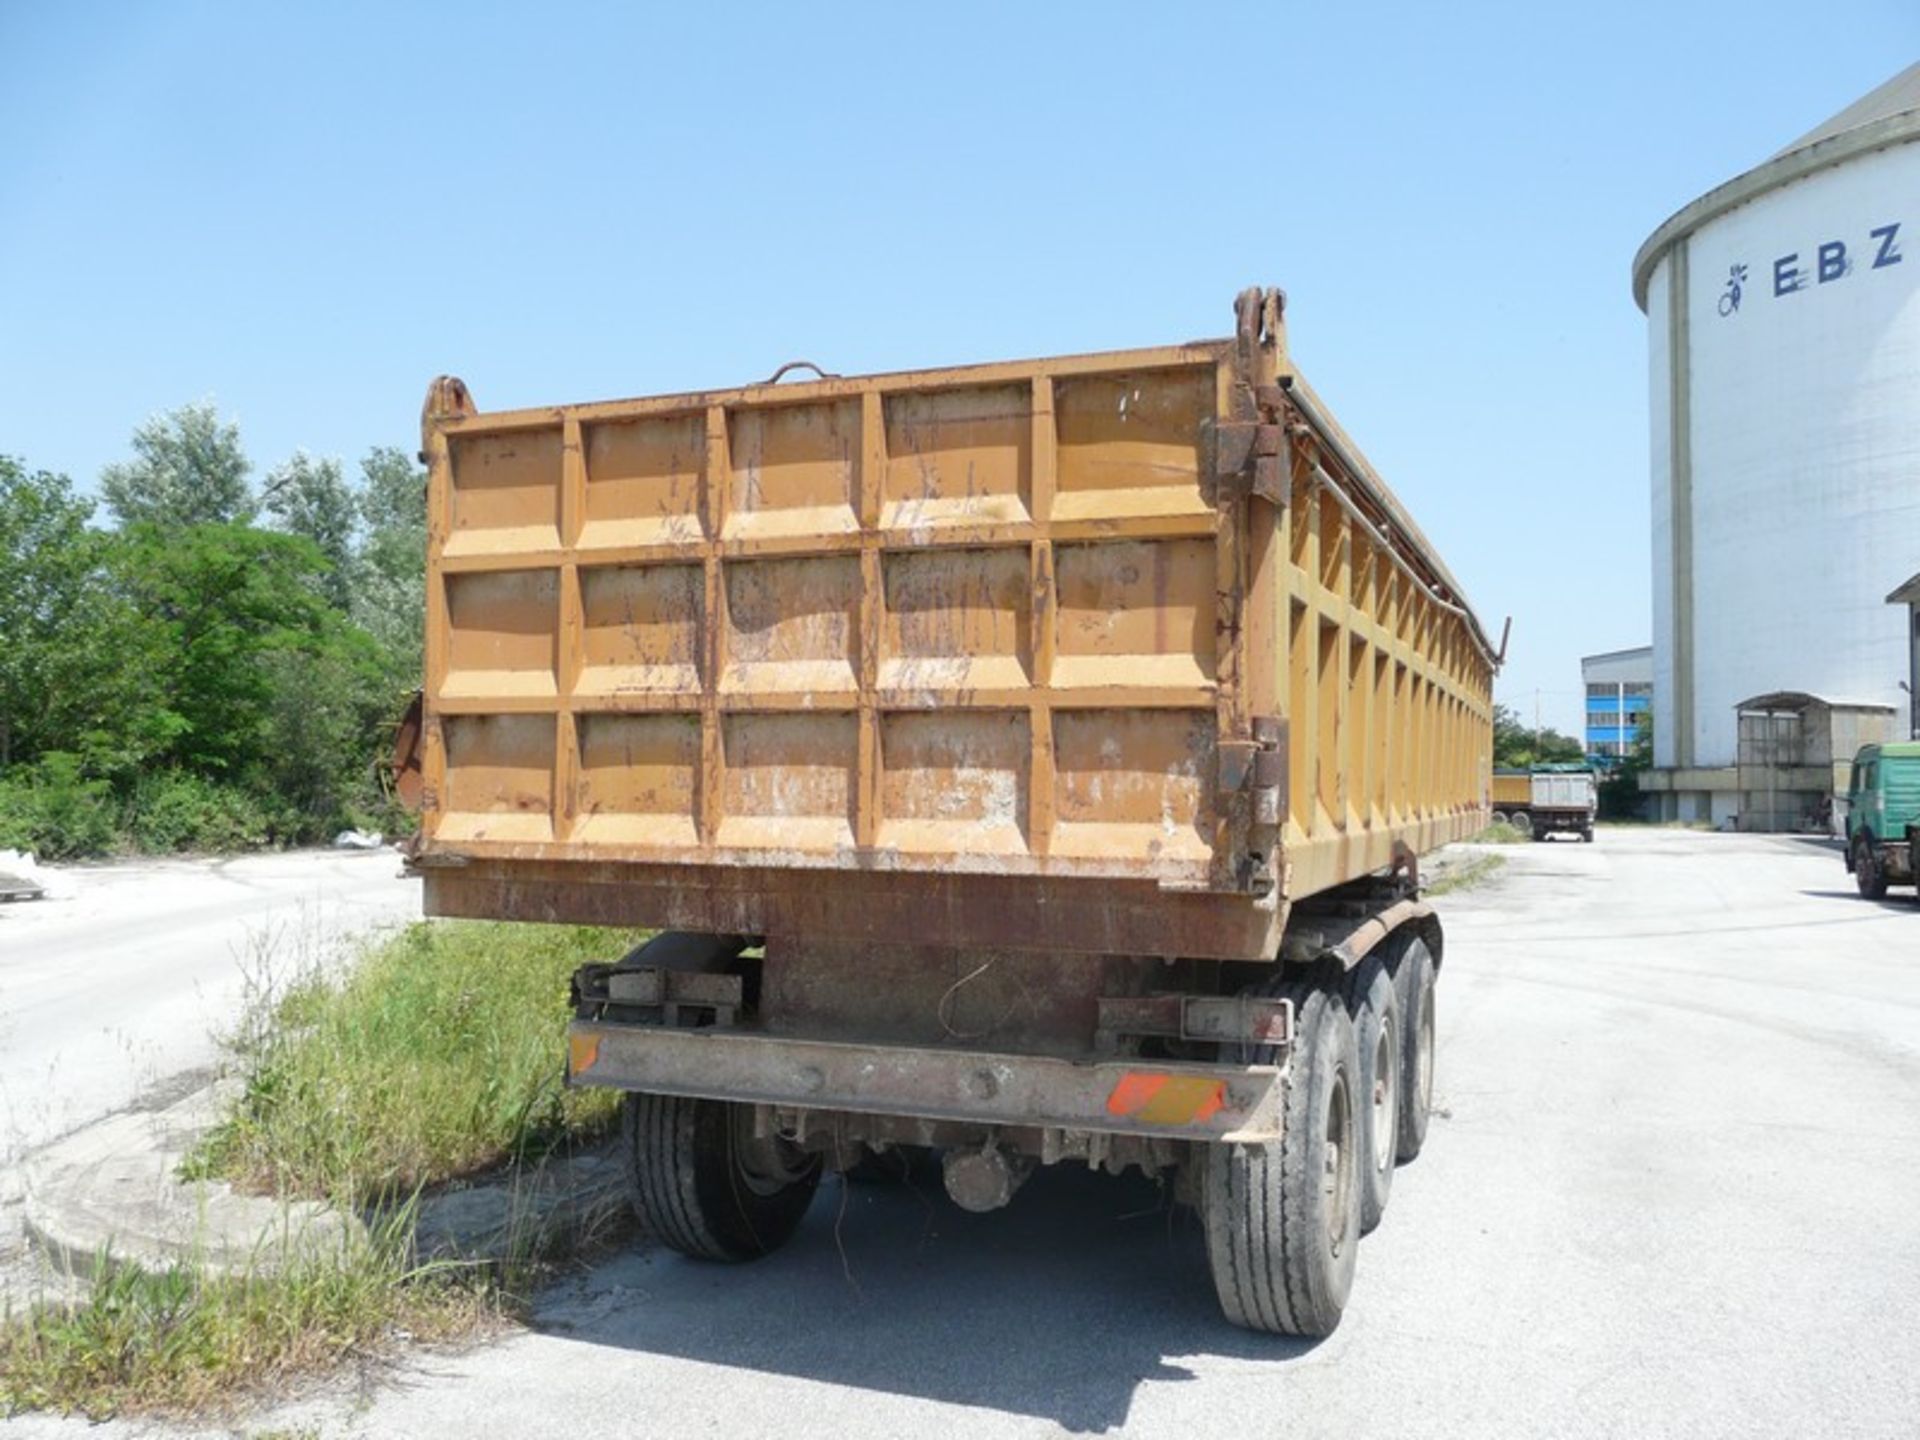 3 AXILE BACK LIFT FOR OFF LOADING GRAVEL WITH SYSTEM TO COVER BACK PART (Located in Greece - Plati - Image 4 of 5